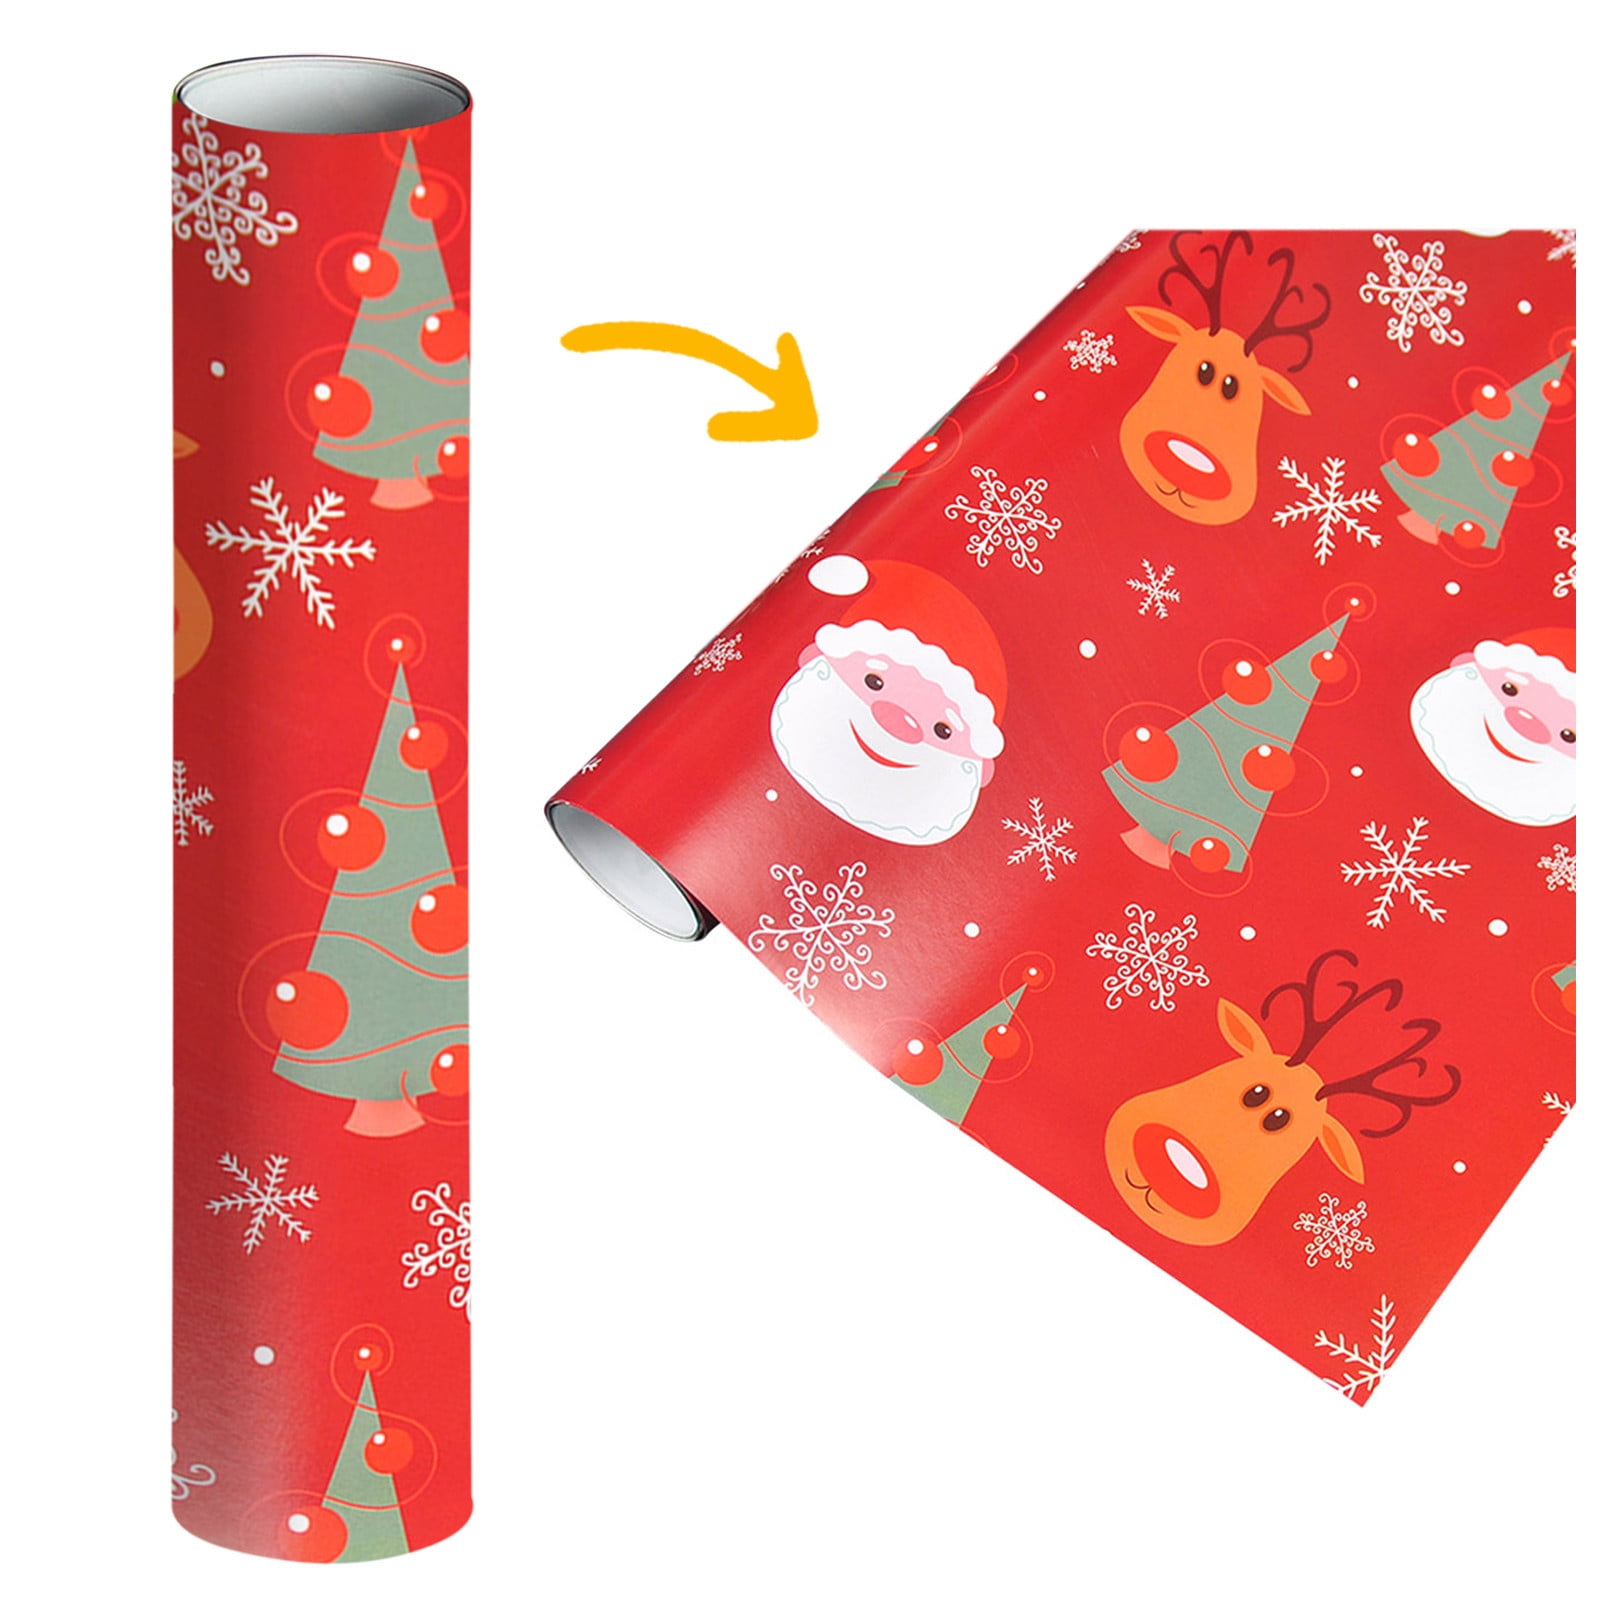 Iopqo Christmas Decorations2PCS ( 75cmX51cm, 4.11 Square Feet)Single-sided Christmas Wrapping Paper, Classic Santa Claus and Other Patterns Wrapping